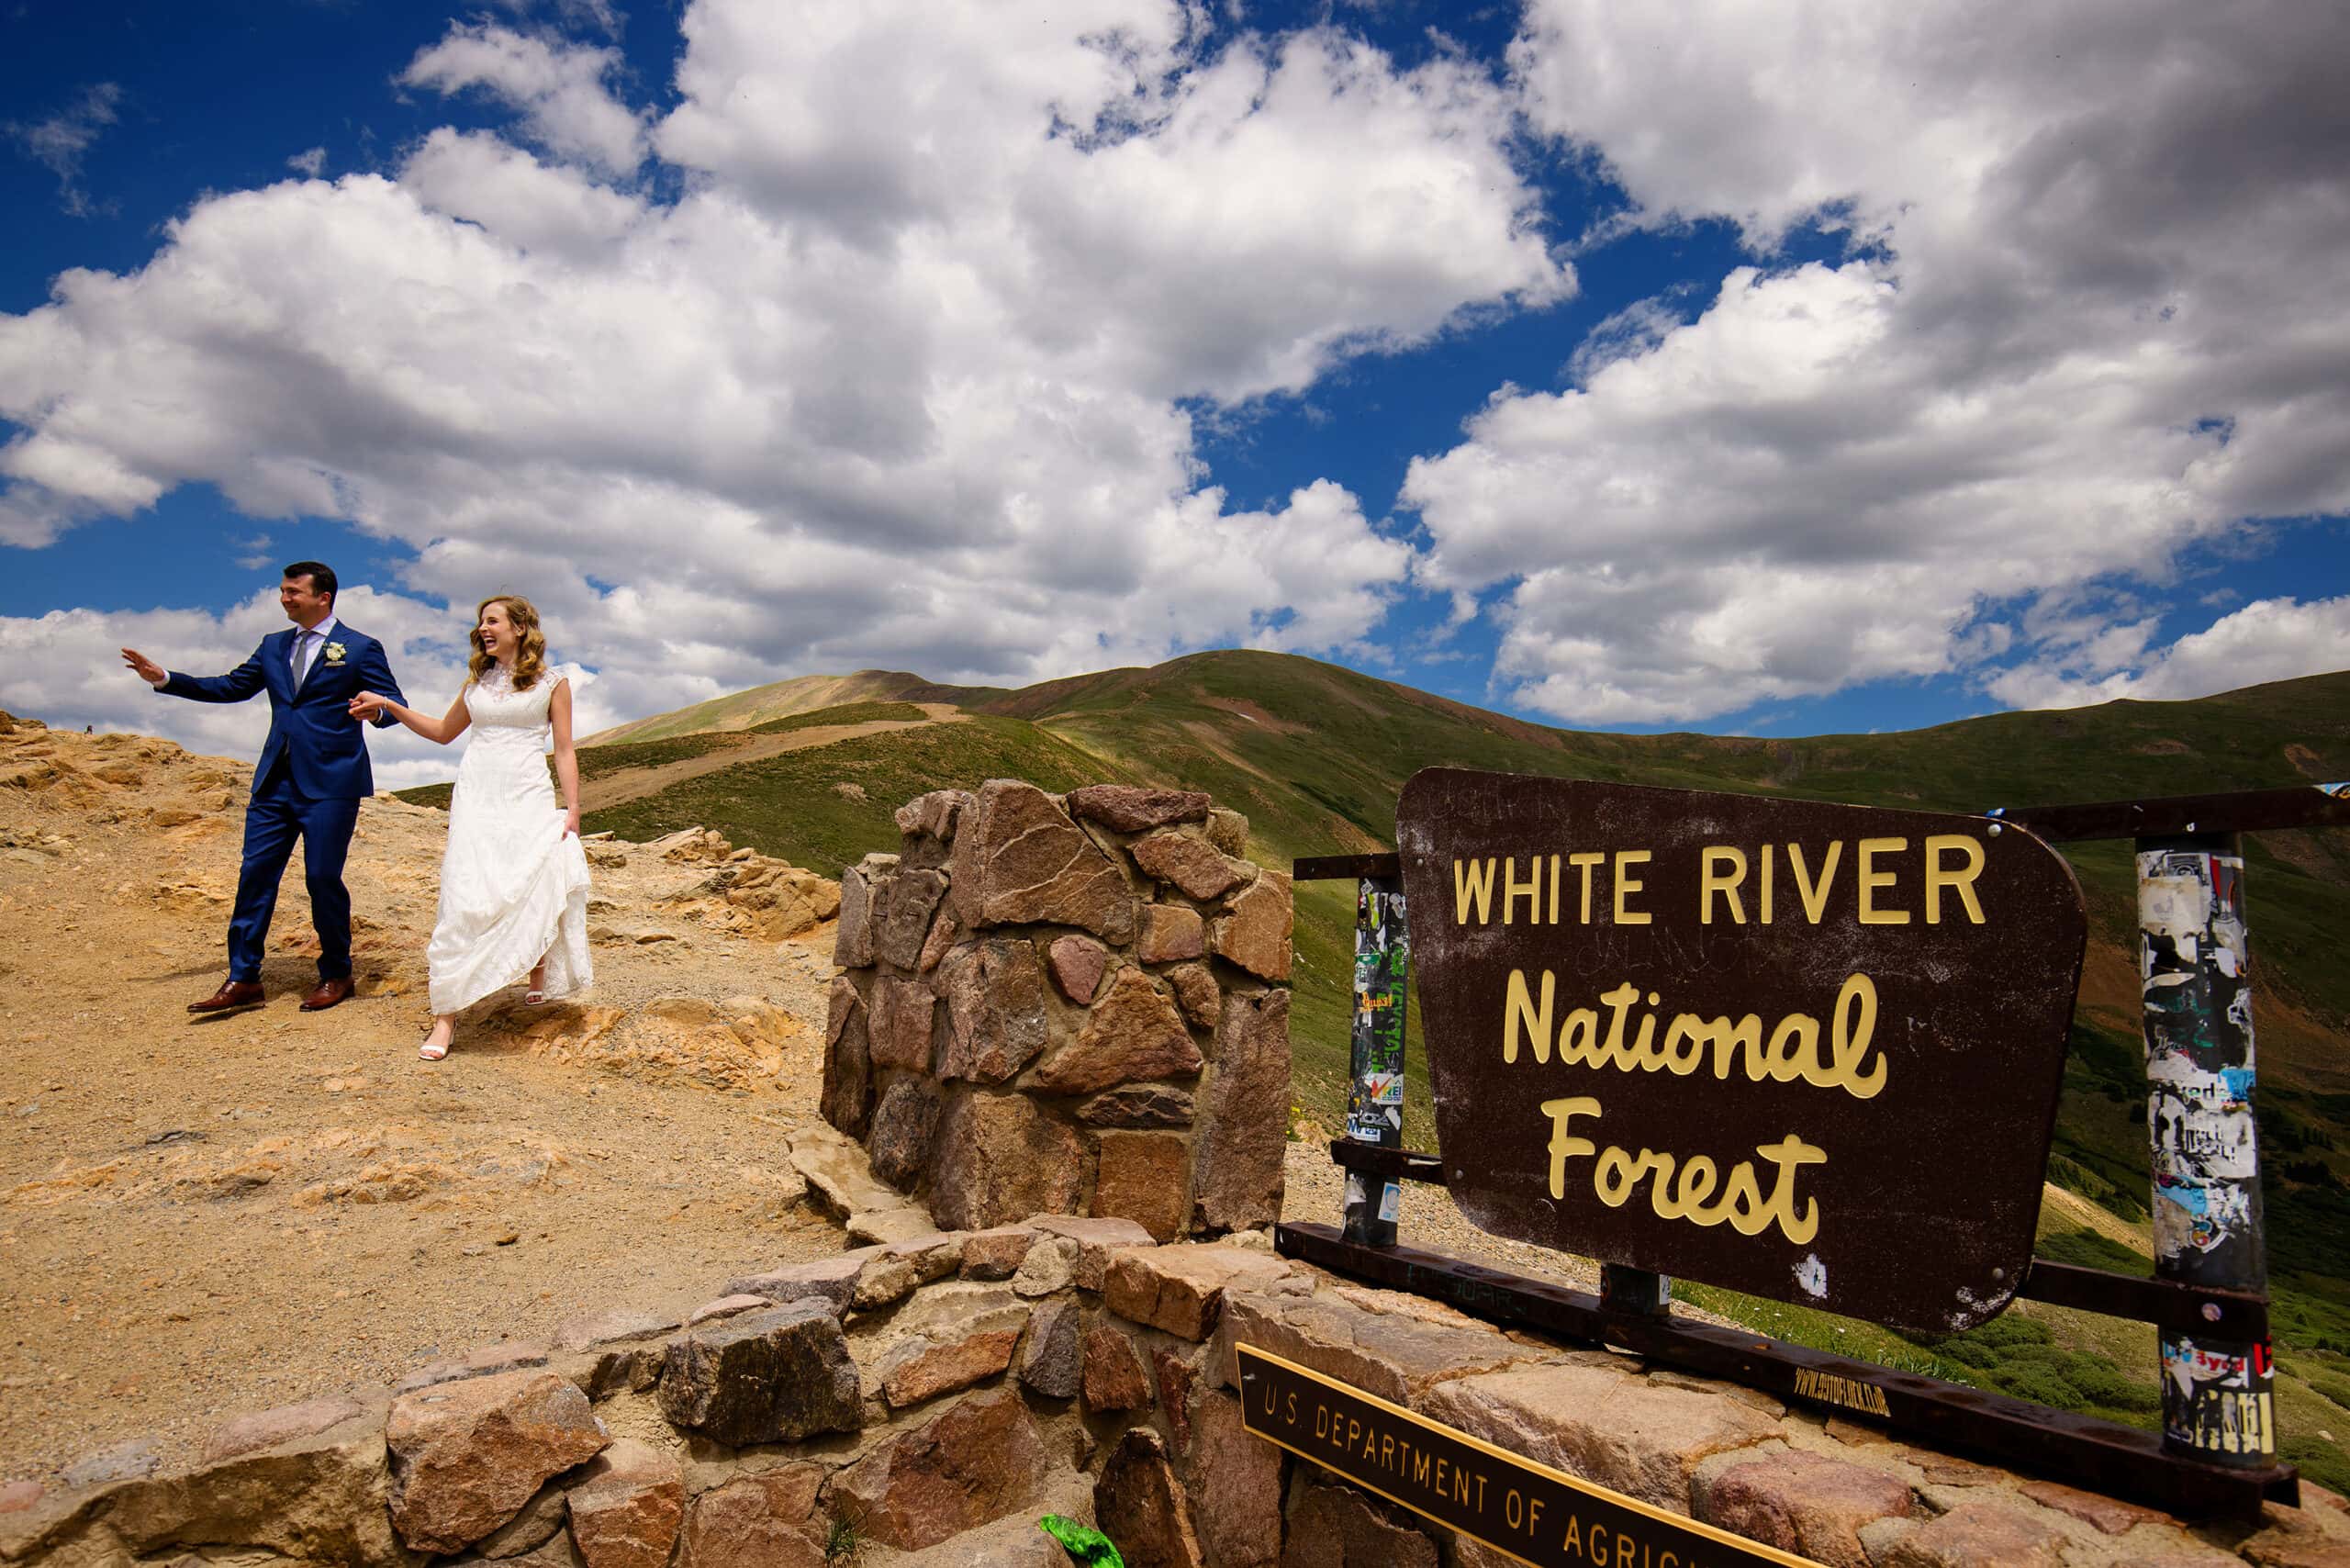 The bride and groom wave to onlookers atop Loveland Pass